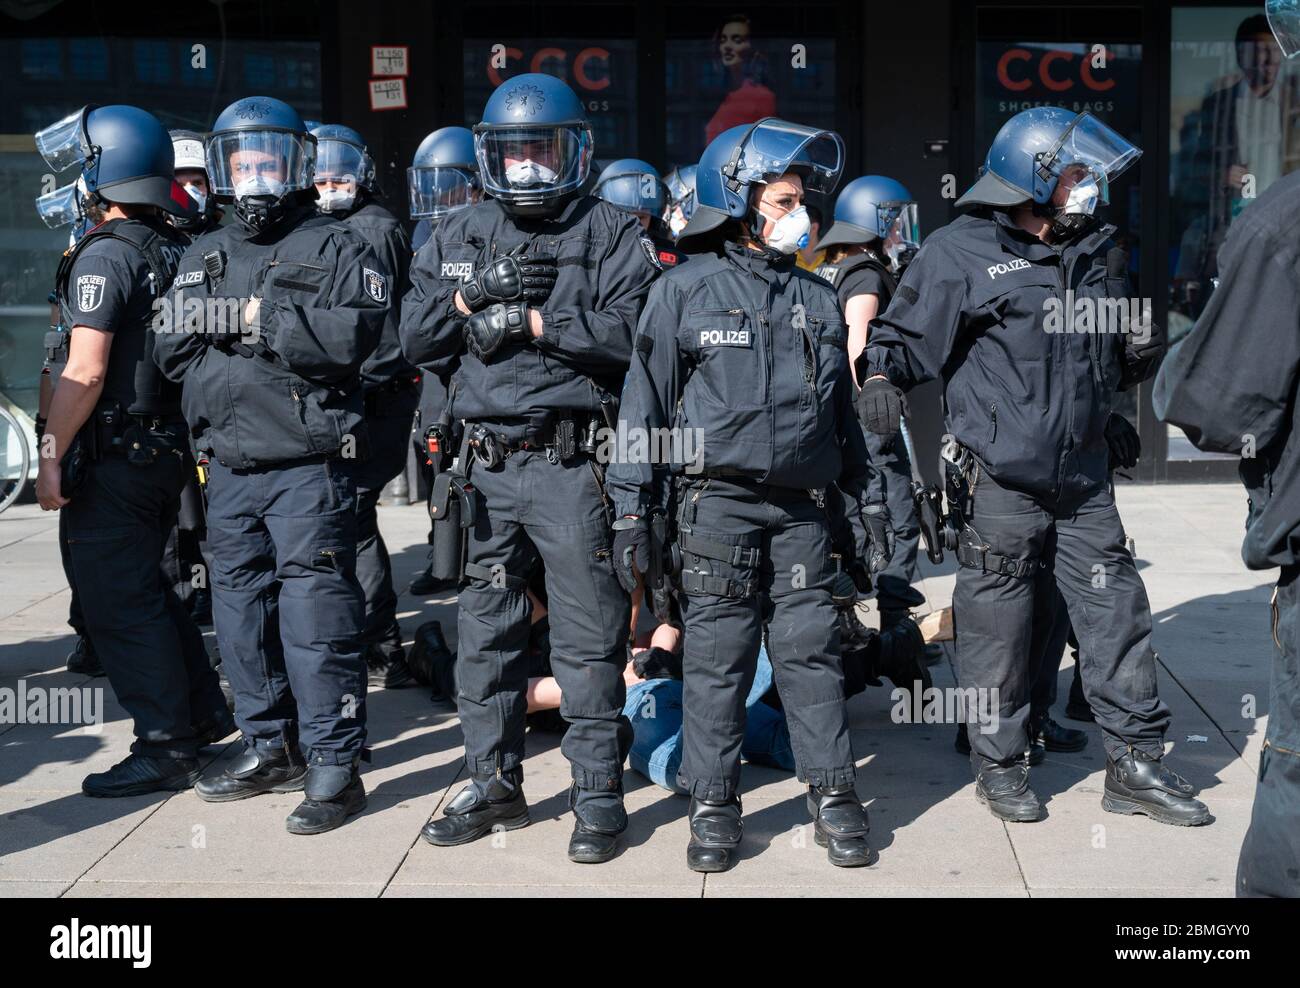 Berlin, Germany. 09th May, 2020. Policemen hold a man on the ground during a demonstration on Alexanderplatz. Several hundred people gathered at Alexanderplatz on Saturday afternoon for an unannounced meeting. The police were on the scene with several task forces. According to a spokeswoman, police officers pointed out to the demonstrators the regulations for containing corona infections. Credit: Christophe Gateau/dpa/Alamy Live News Stock Photo